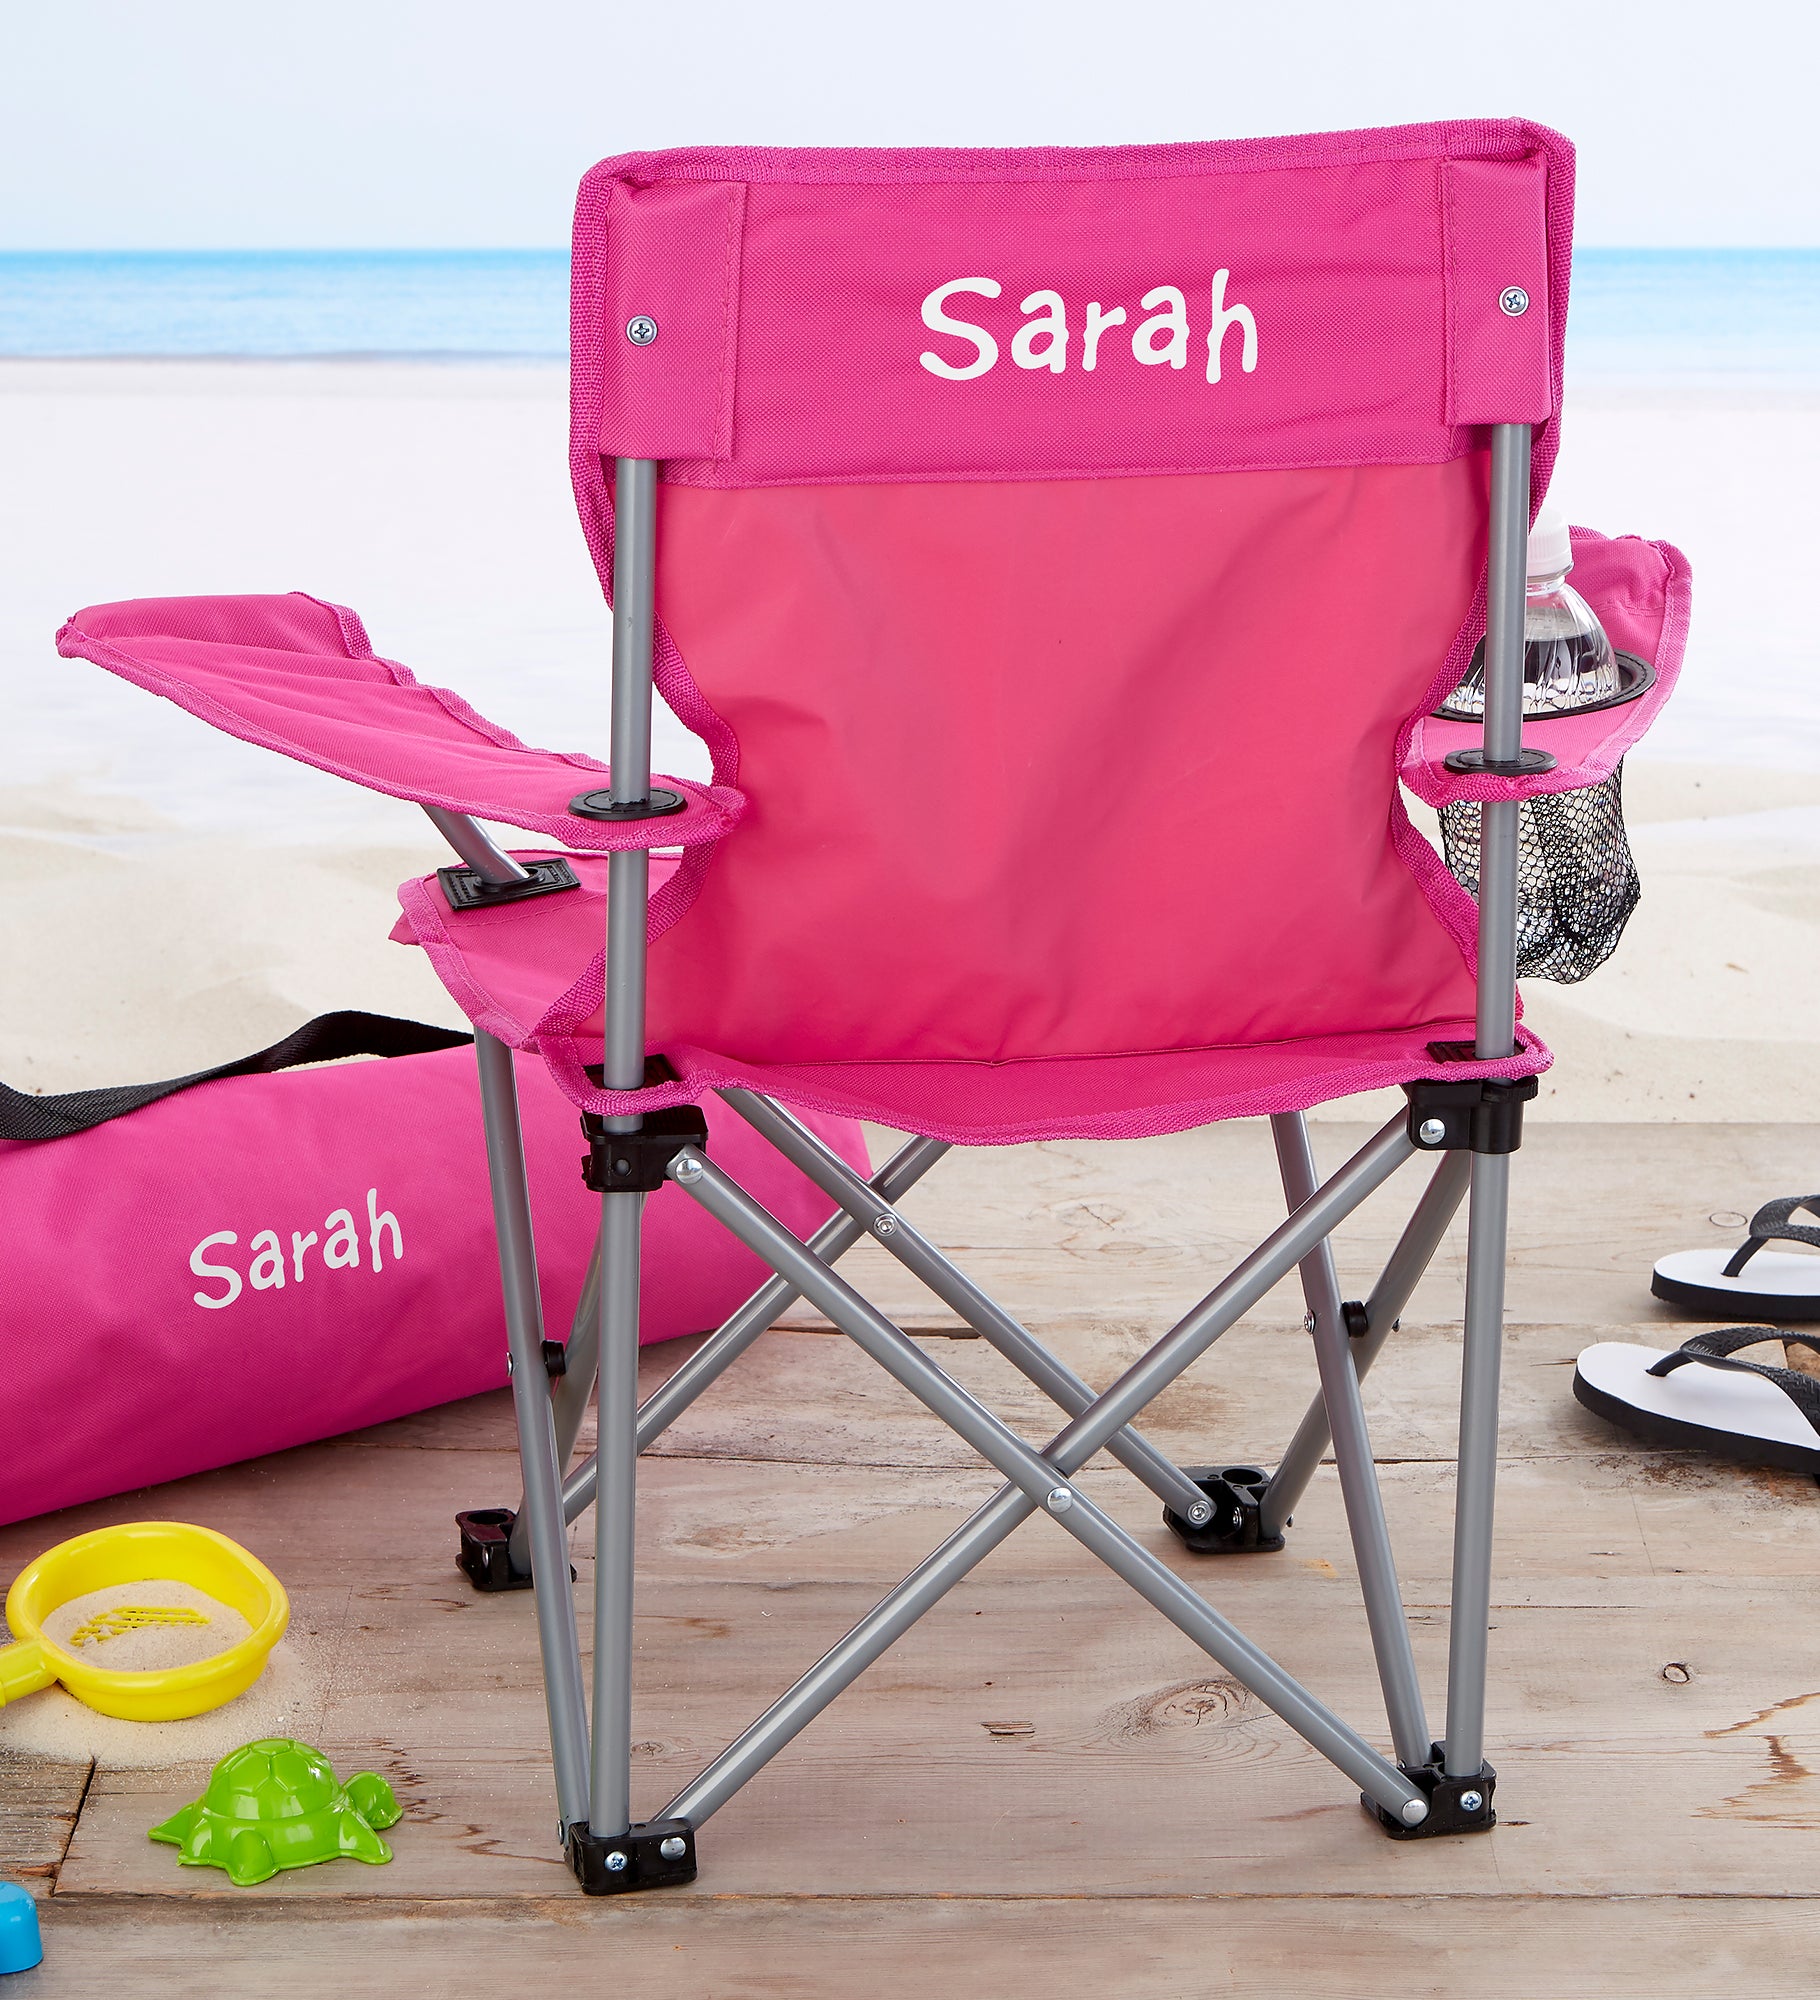 Toddler Personalized Pink Folding Camp Chair by Stephen Joseph